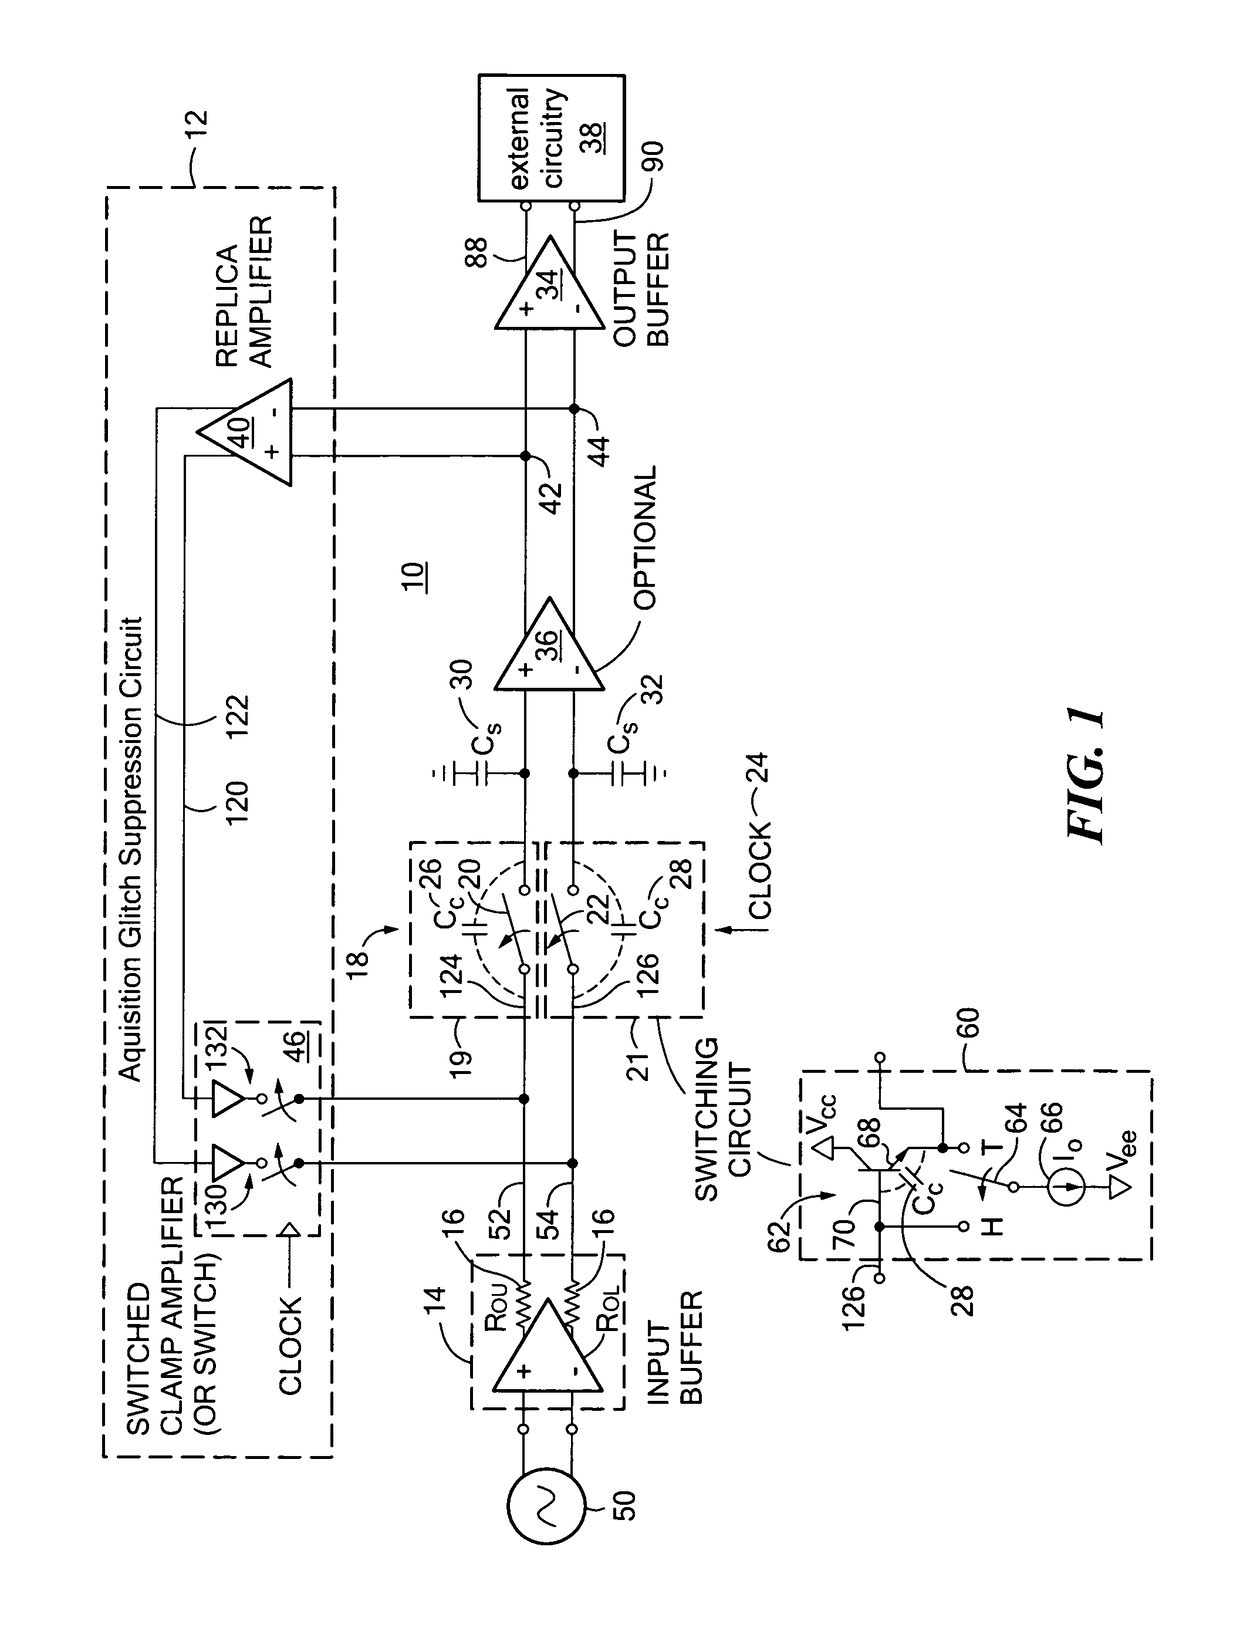 Track-and-hold circuit with acquisition glitch suppression